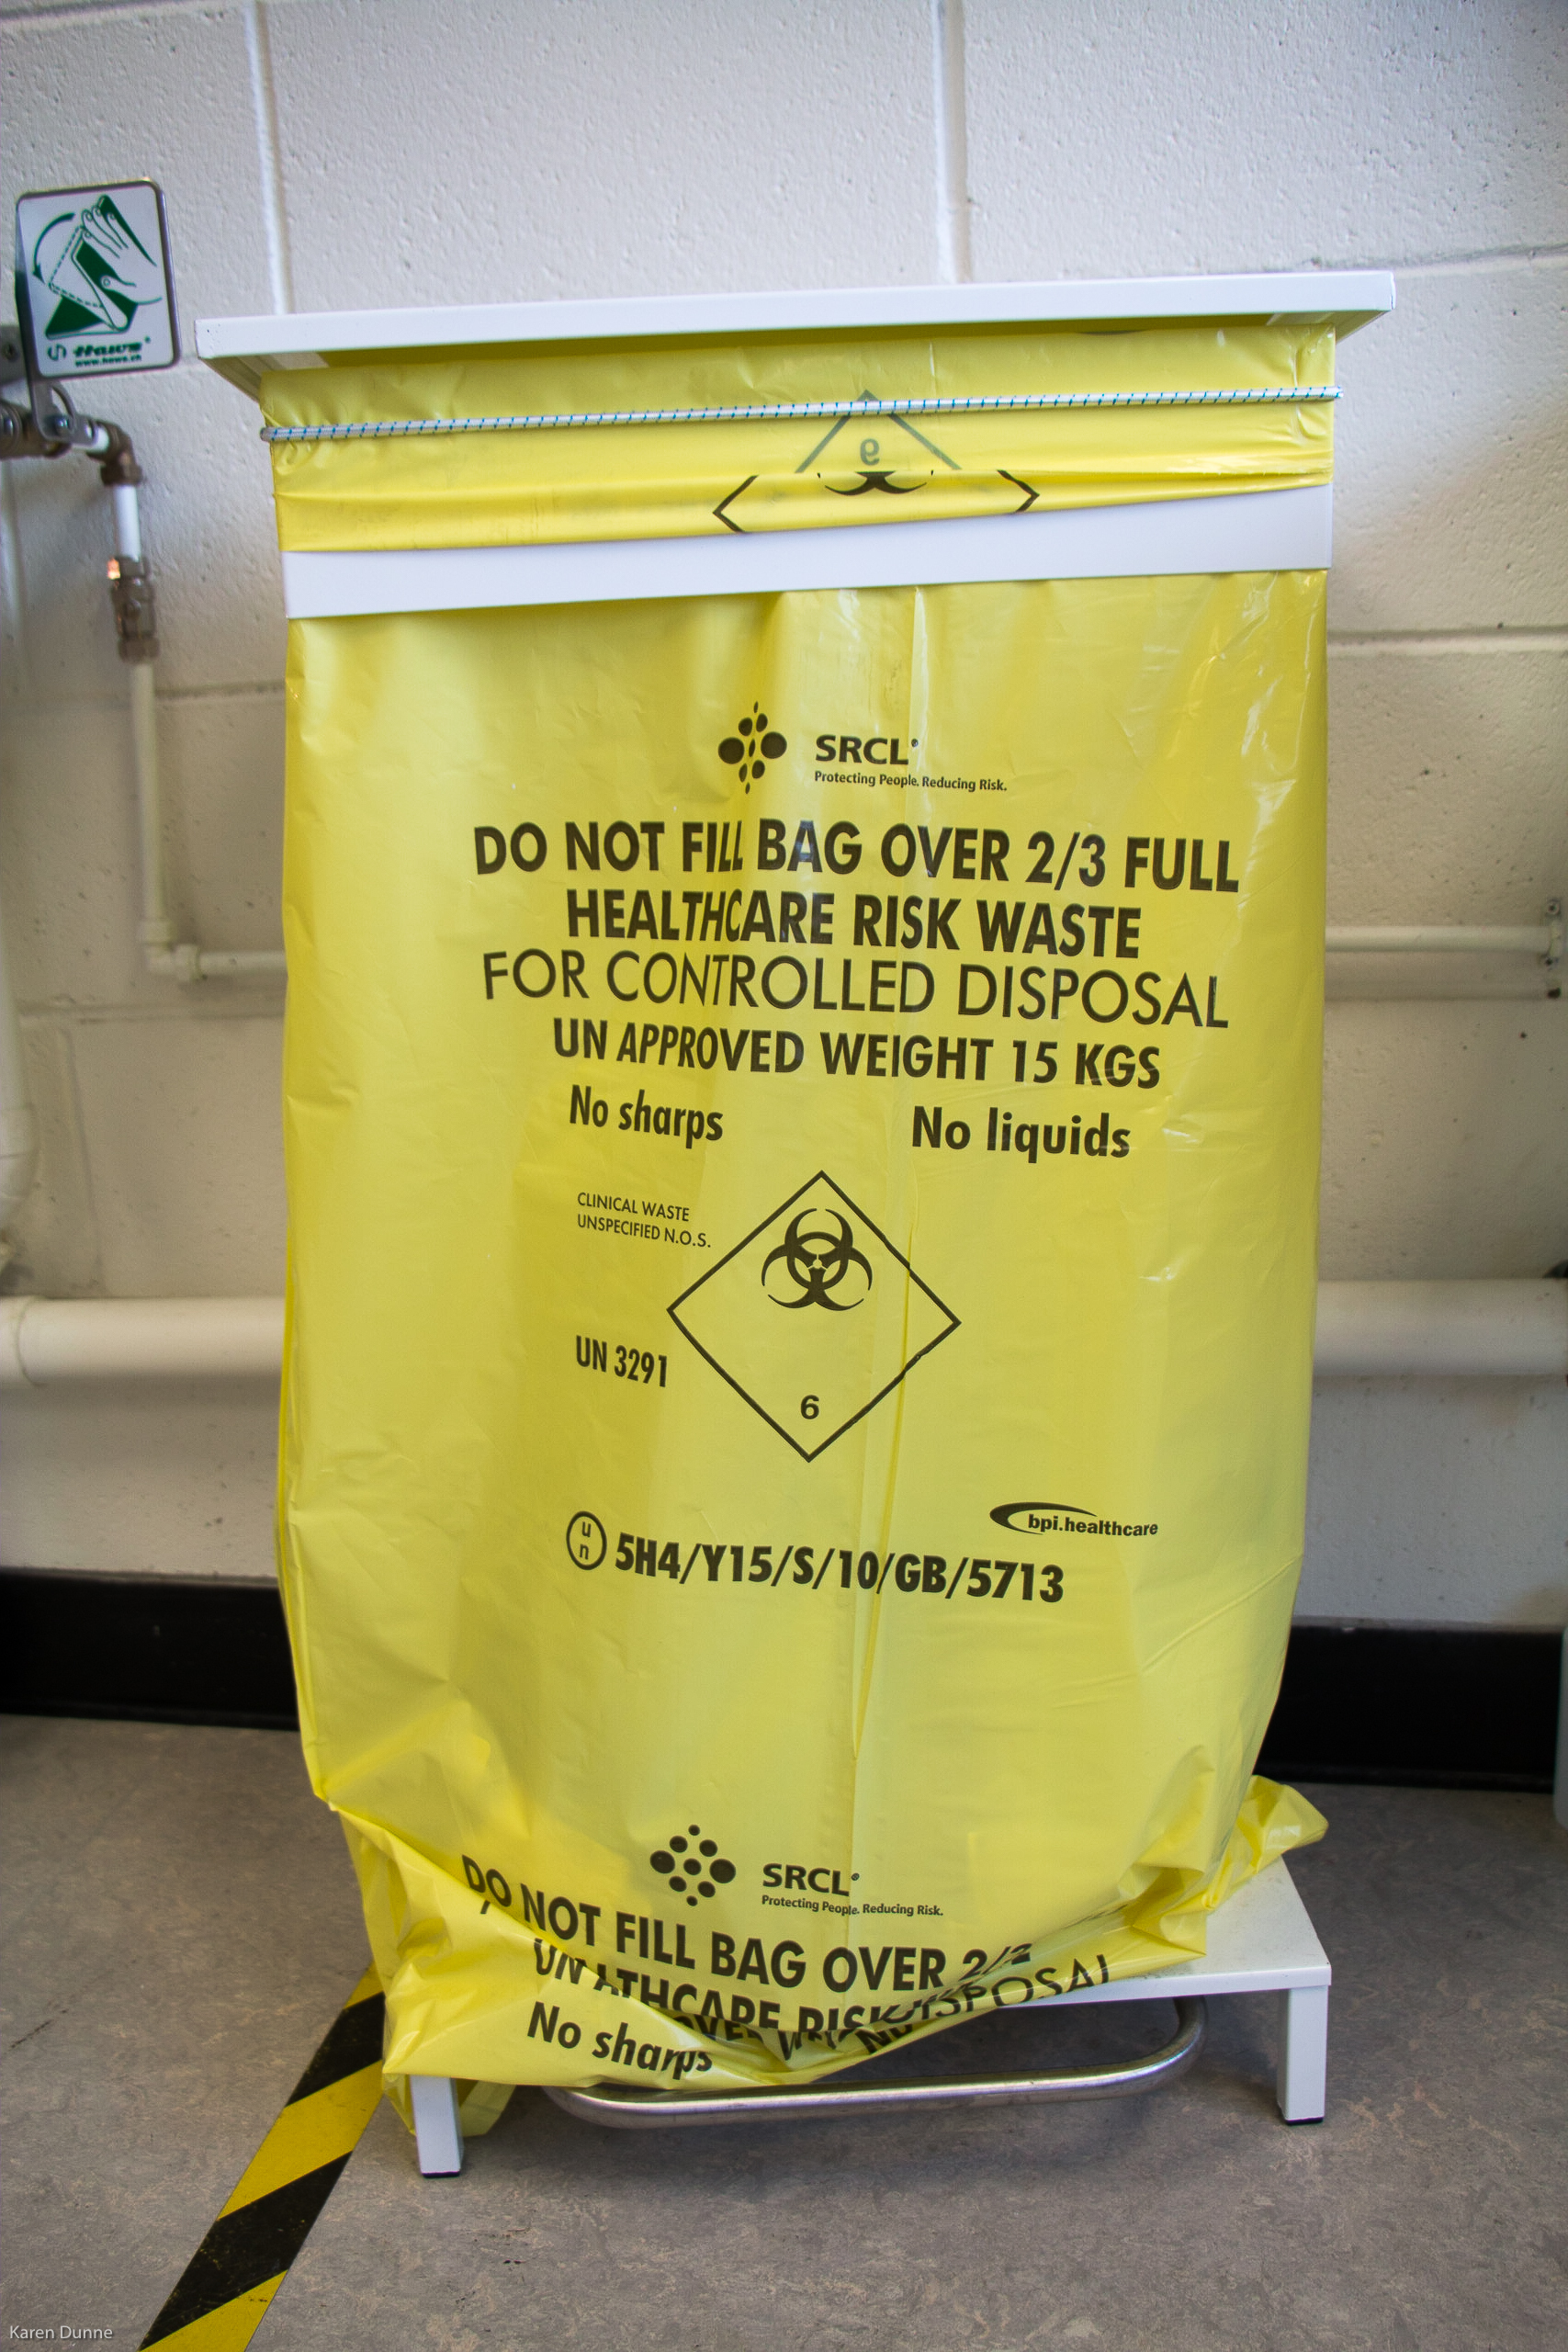 Soft clinical waste only